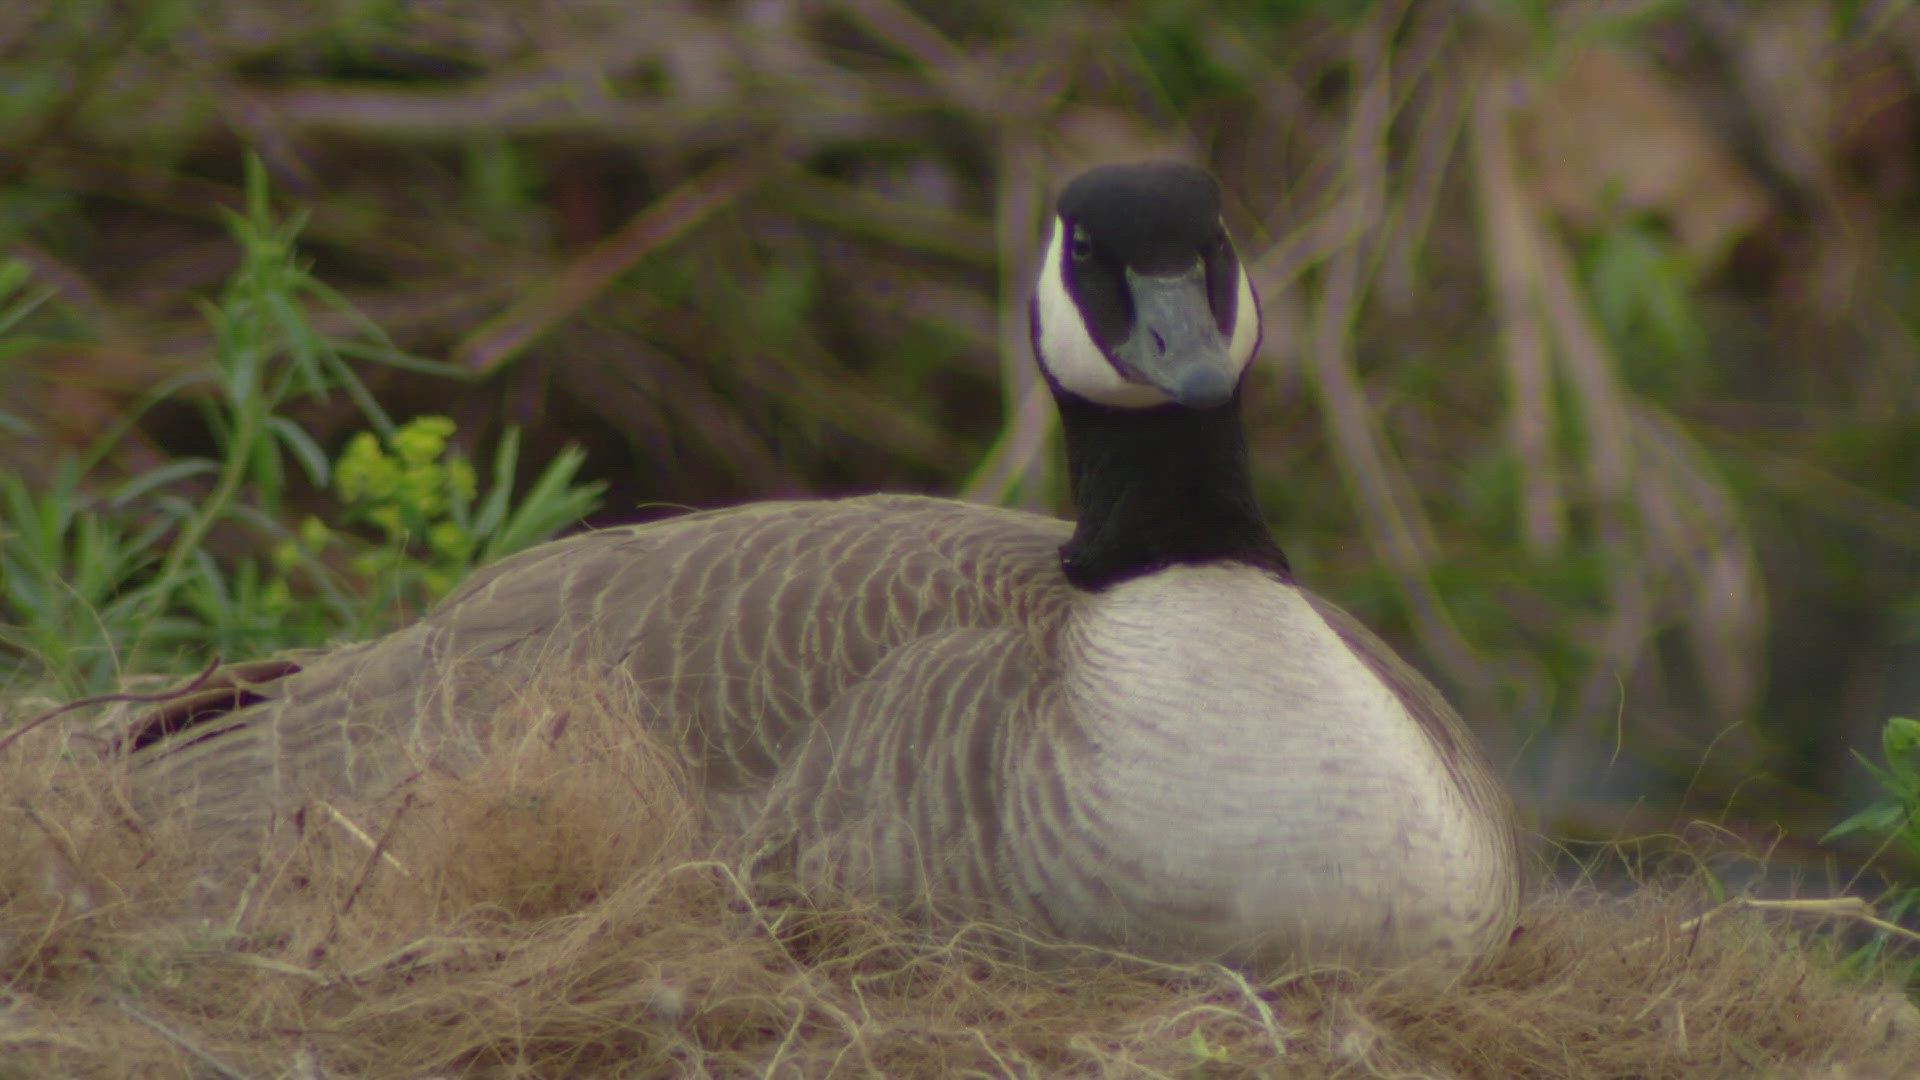 This goose has decided a nest just feet away from heavy traffic and a noisy downtown is the perfect place to raise a family.